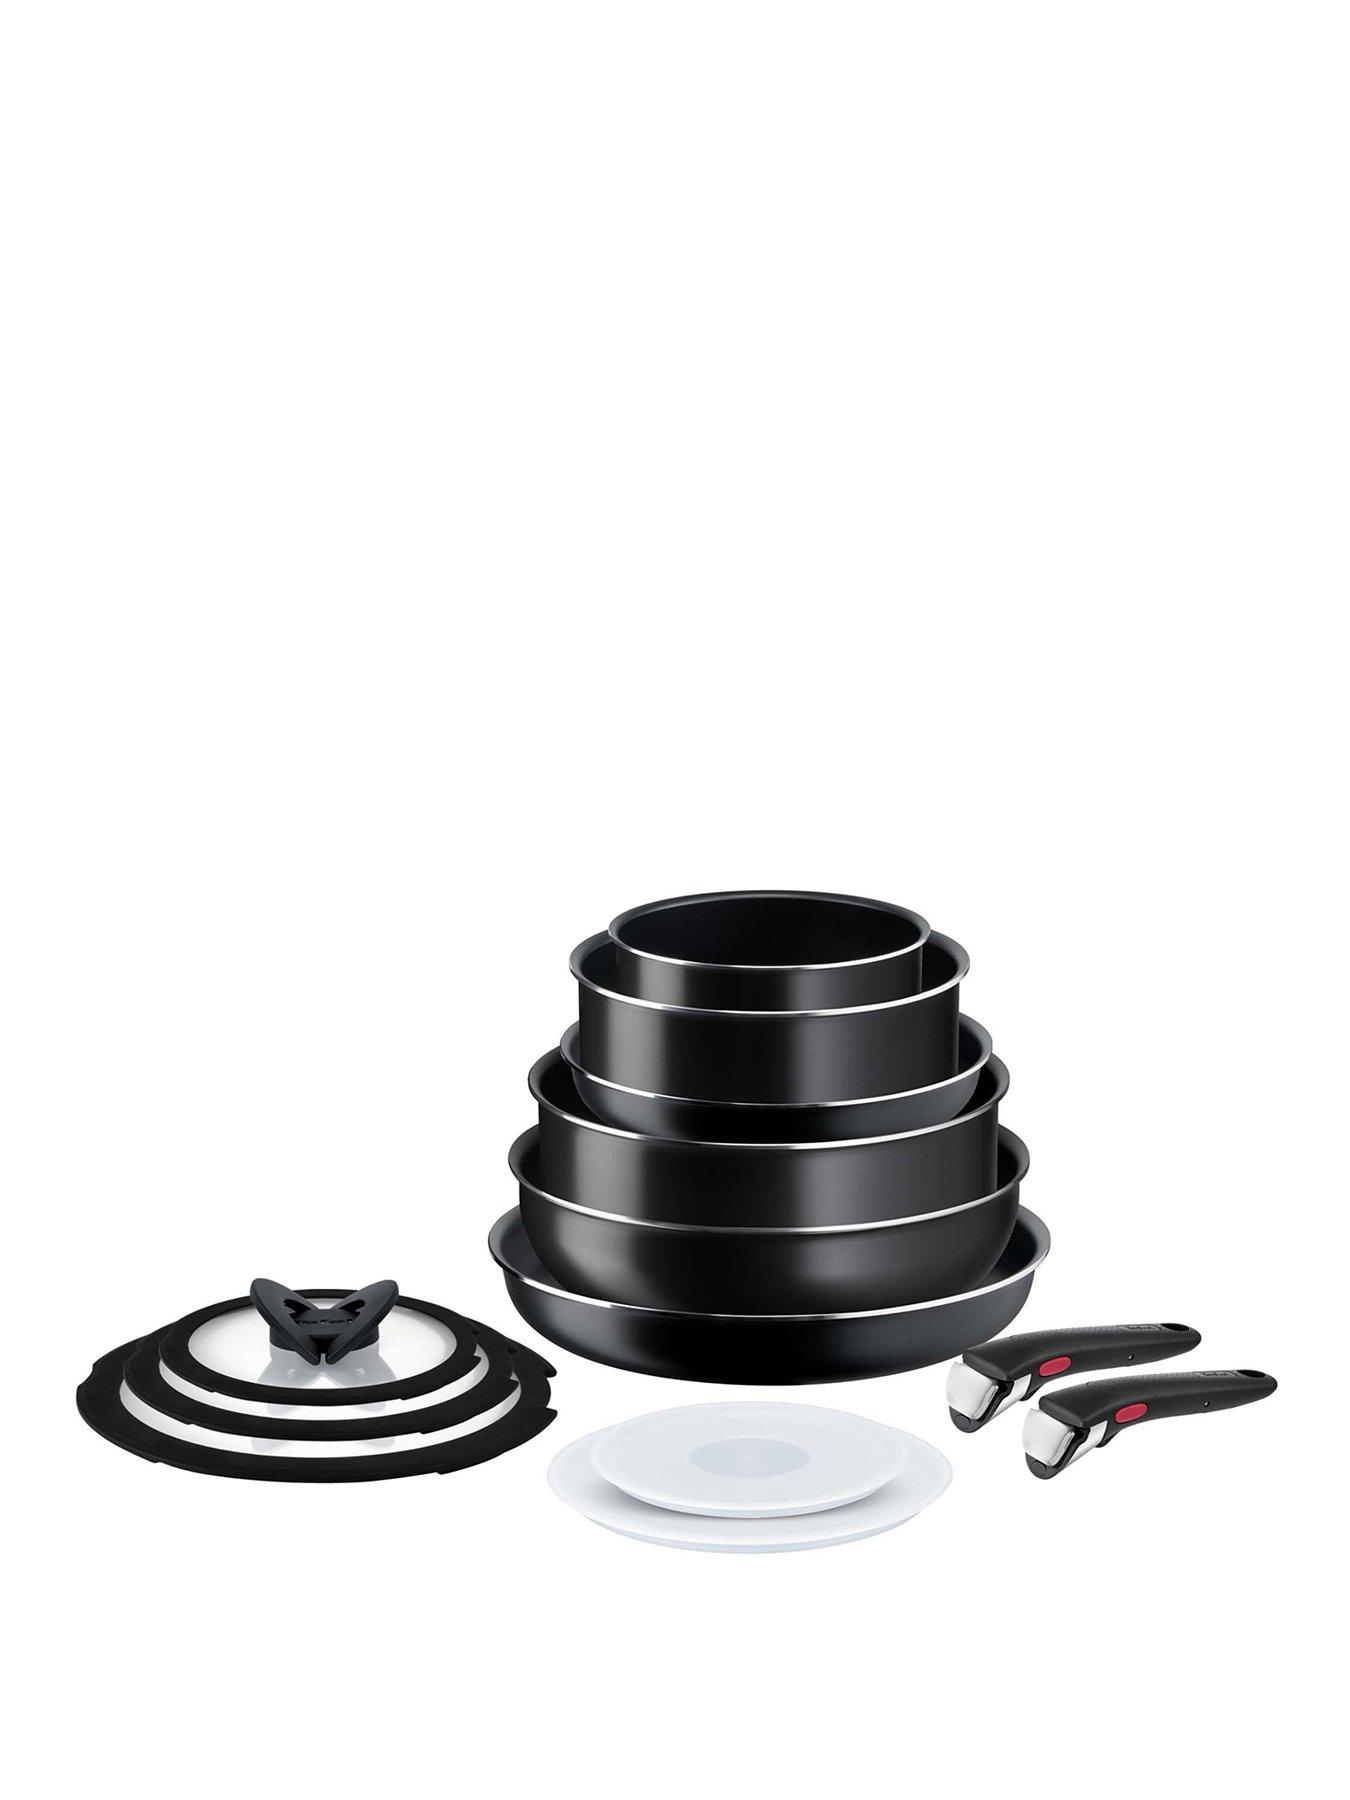 Tefal Turbo Cuisine Electric Pressure Cooker, 10 Programmes inc. stew,  steam, bake, slow cooker, Rice cooker, 4.8L, 1000 W, Plastic, Black,  CY754840 - The Batch Lady